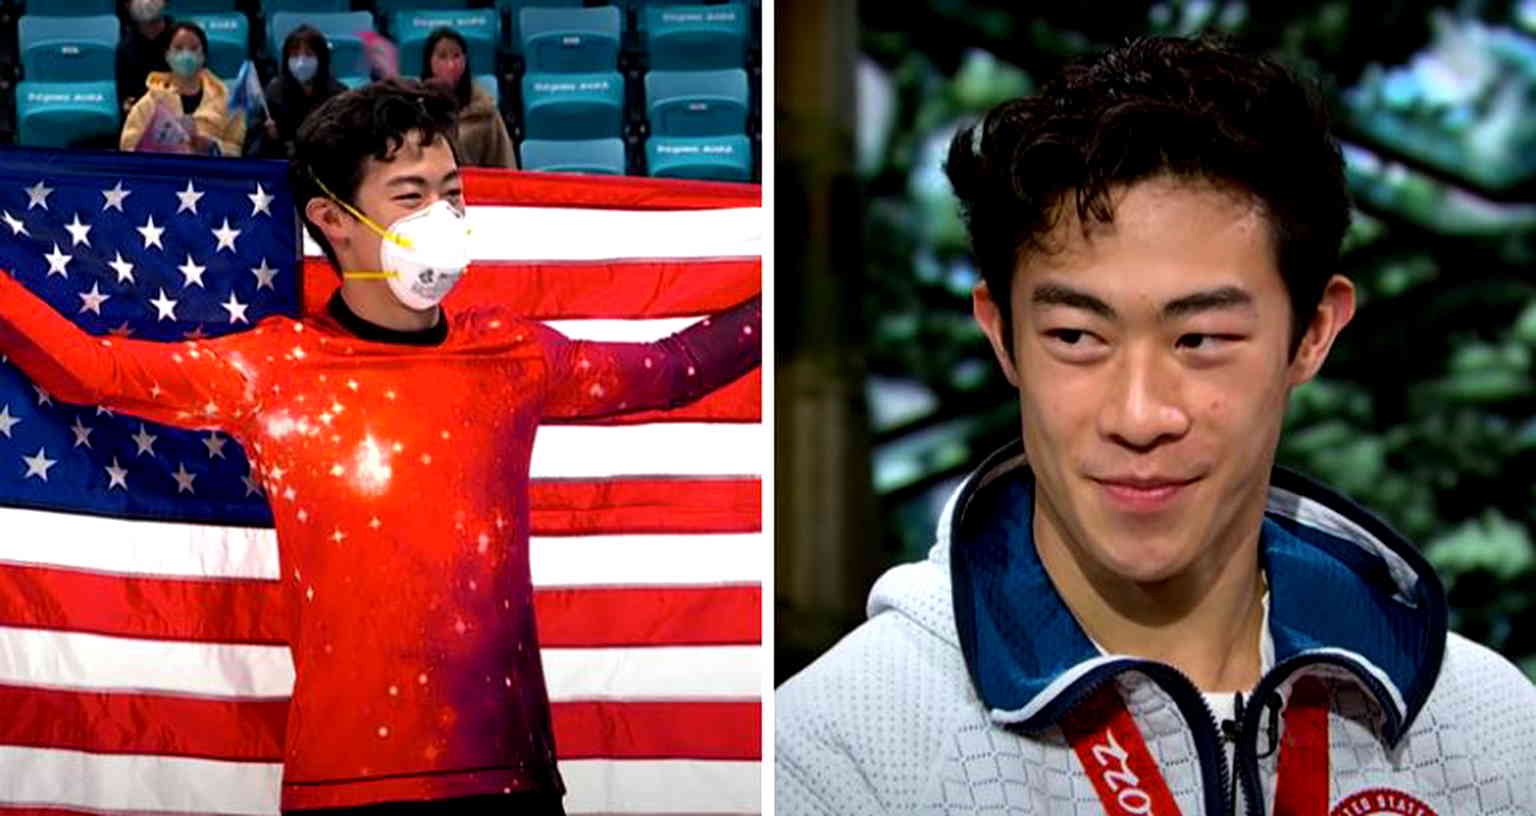 US-born Olympian Nathan Chen called a ‘traitor’ on Chinese social media